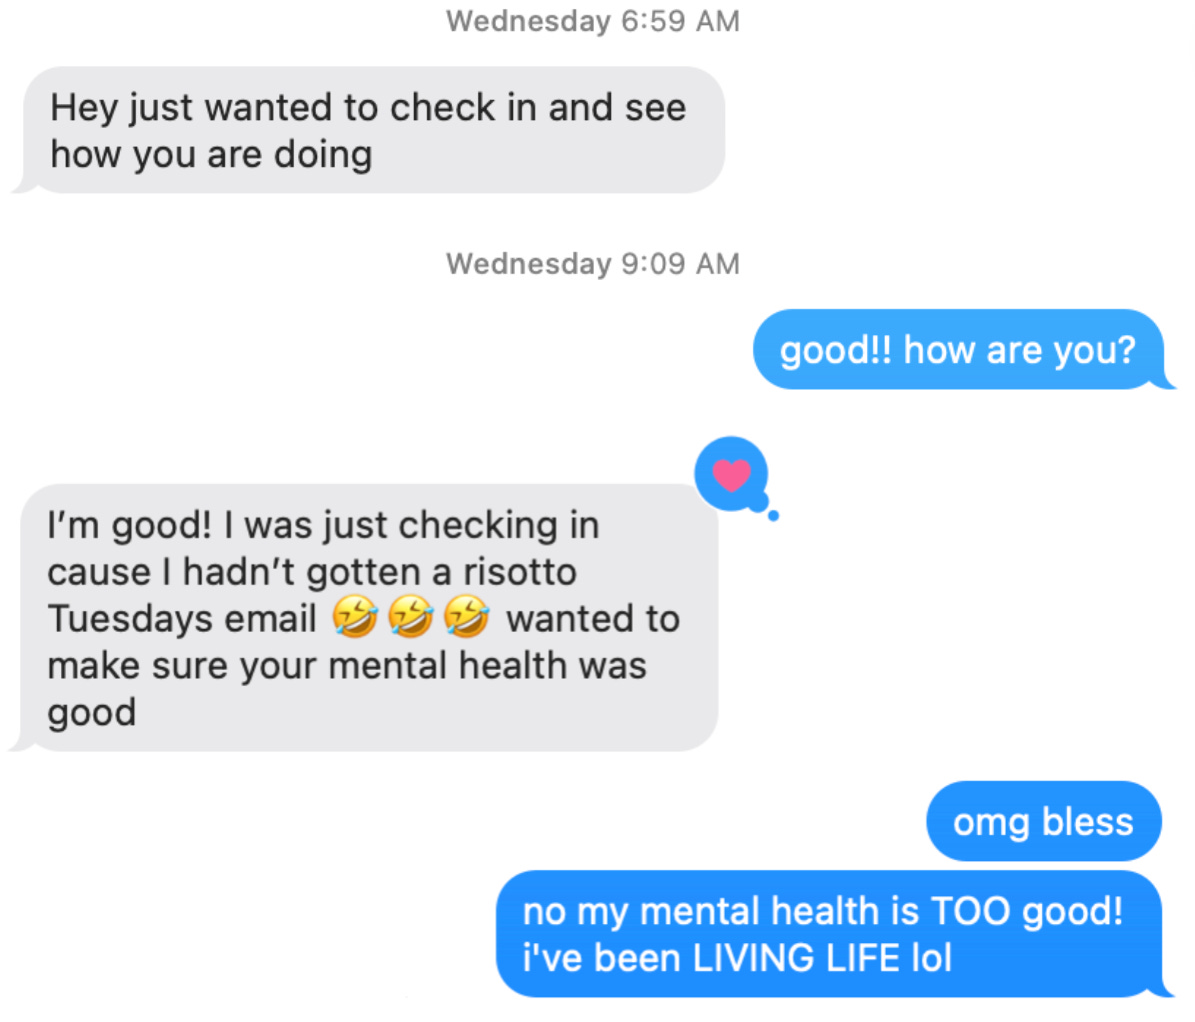 Chat conversation. Person 1: Hey just wanted to check in and see how you are doing. Person 2: Good!! how are you? Person 1: I'm good. I was just checking in cause I hadn't gotten a risotto Tuesdays email [3 laughing emojis] wanted to make sure your mental health was good. Person 2: omg bless Person 2: no my mental health is TOO good! i've been LIVING LIFE lol